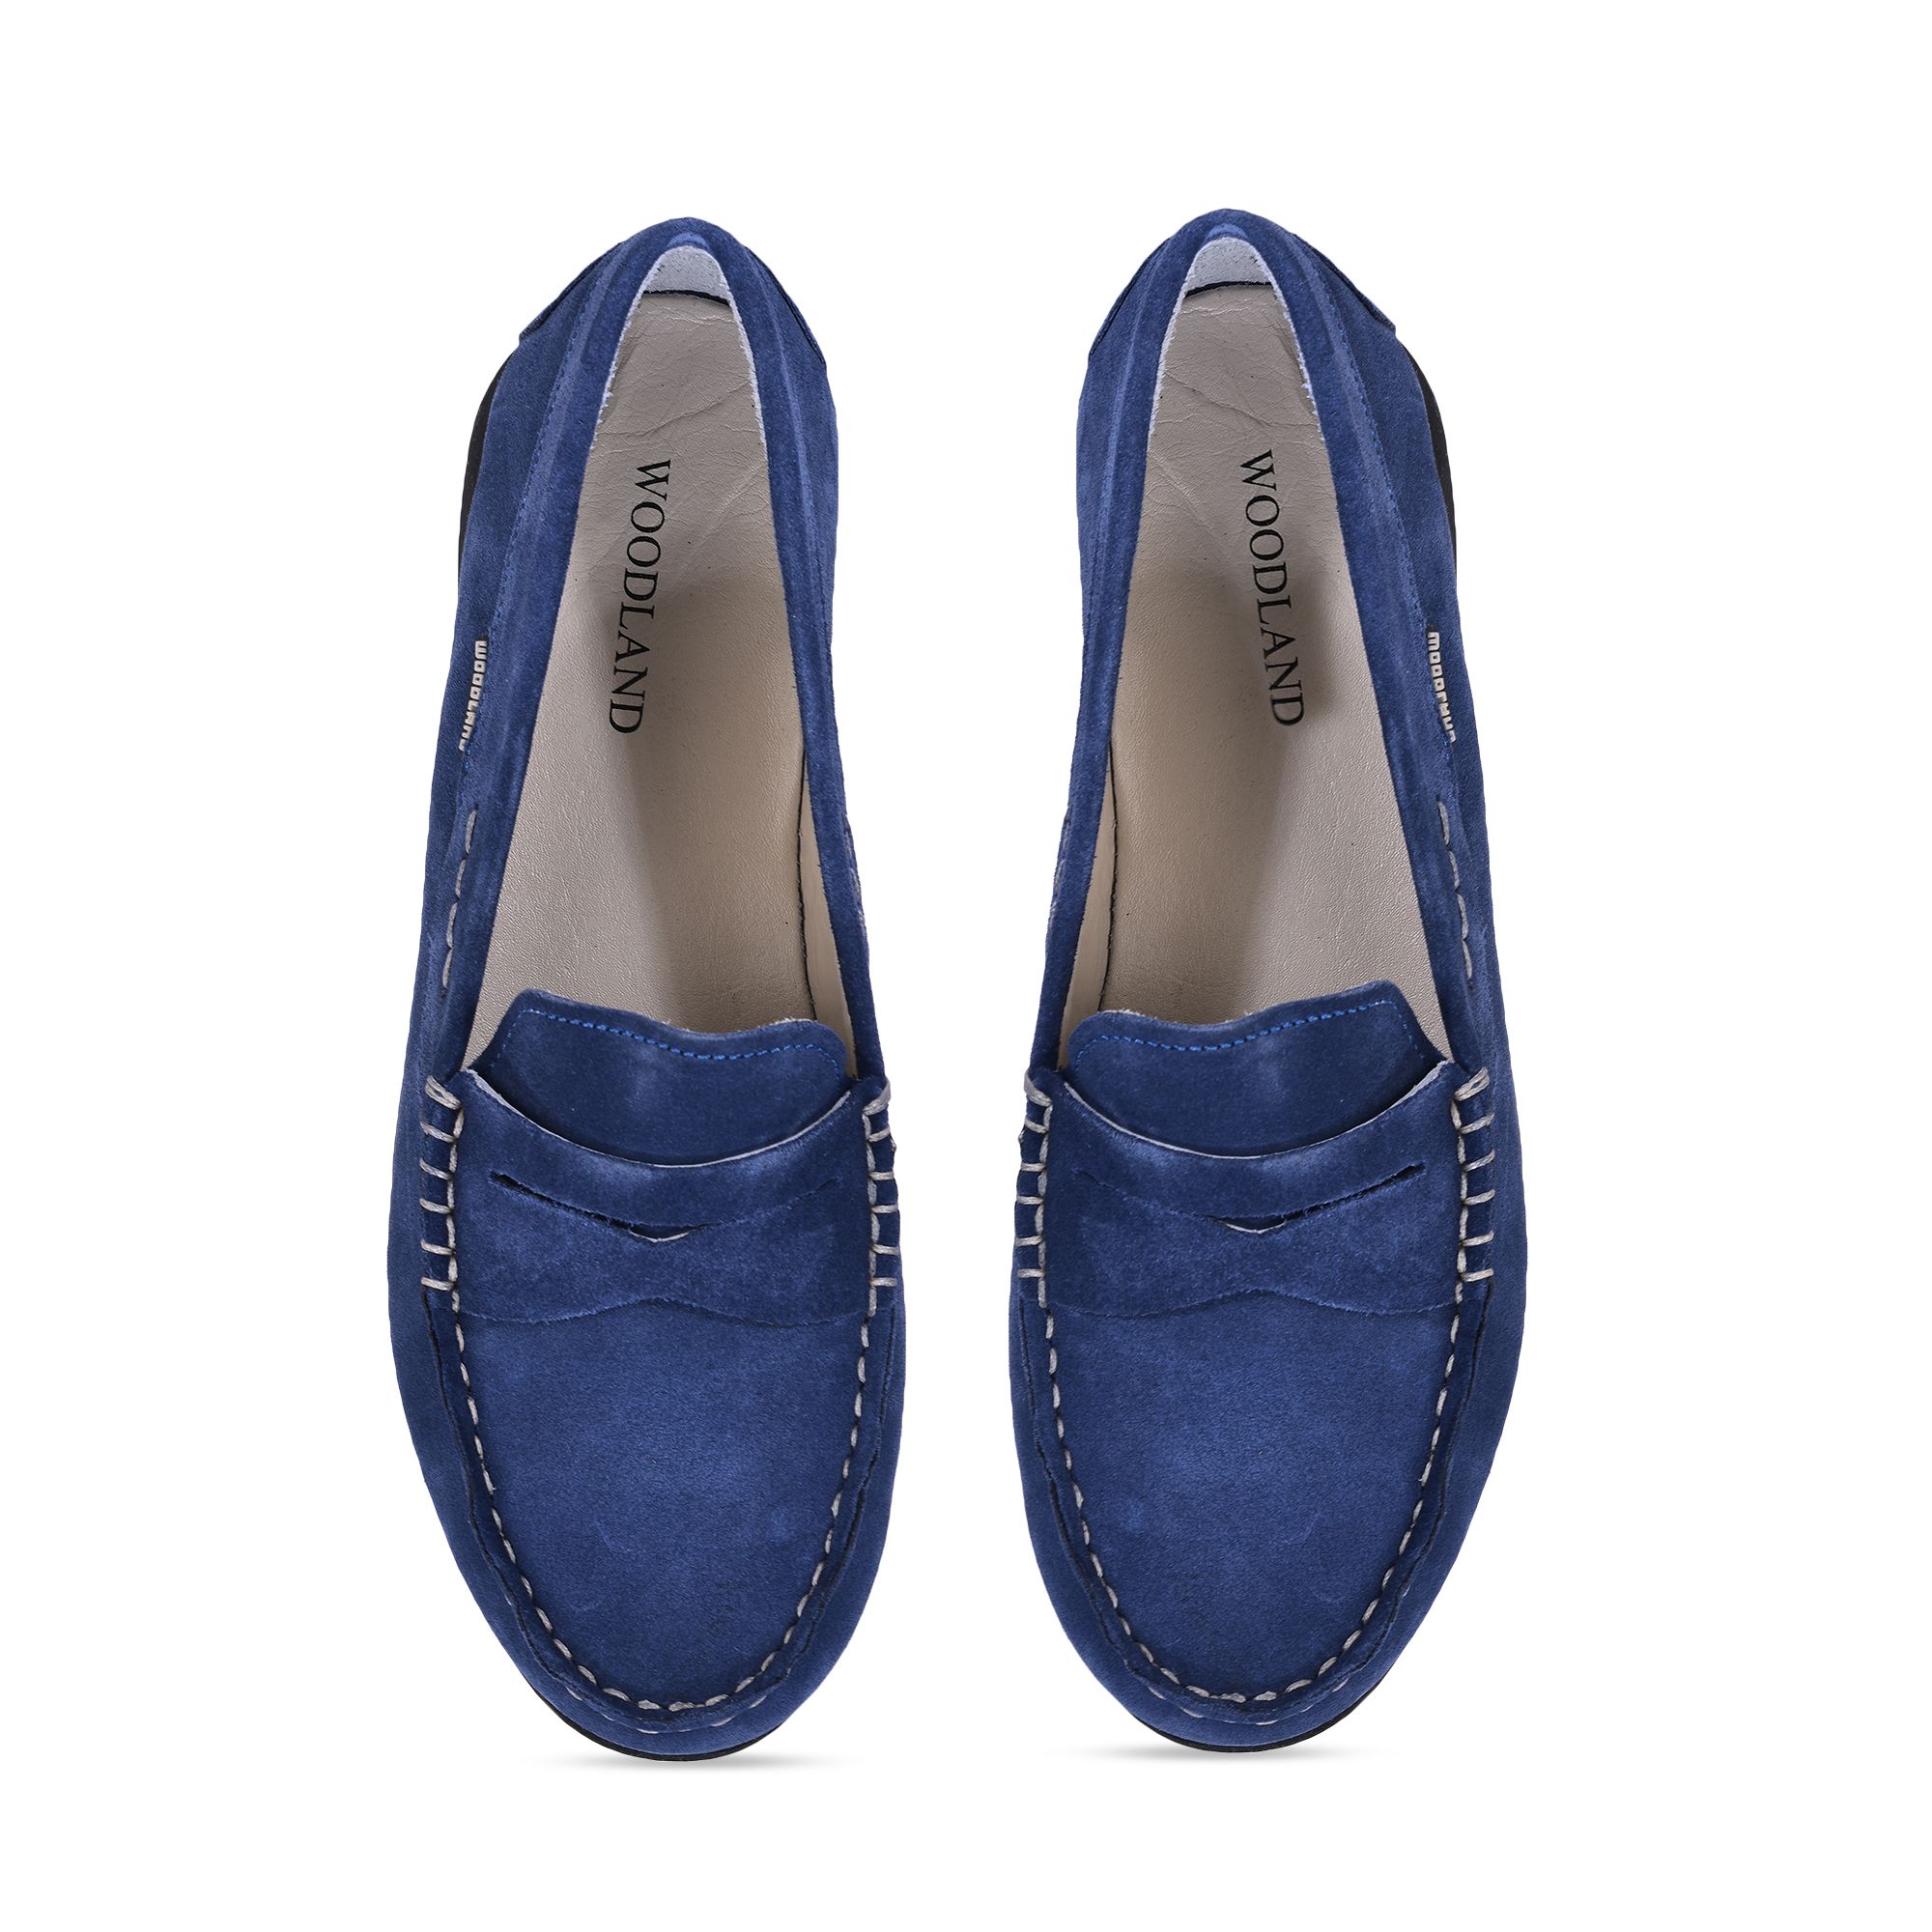 BRIGHT RBLUE loafers for women